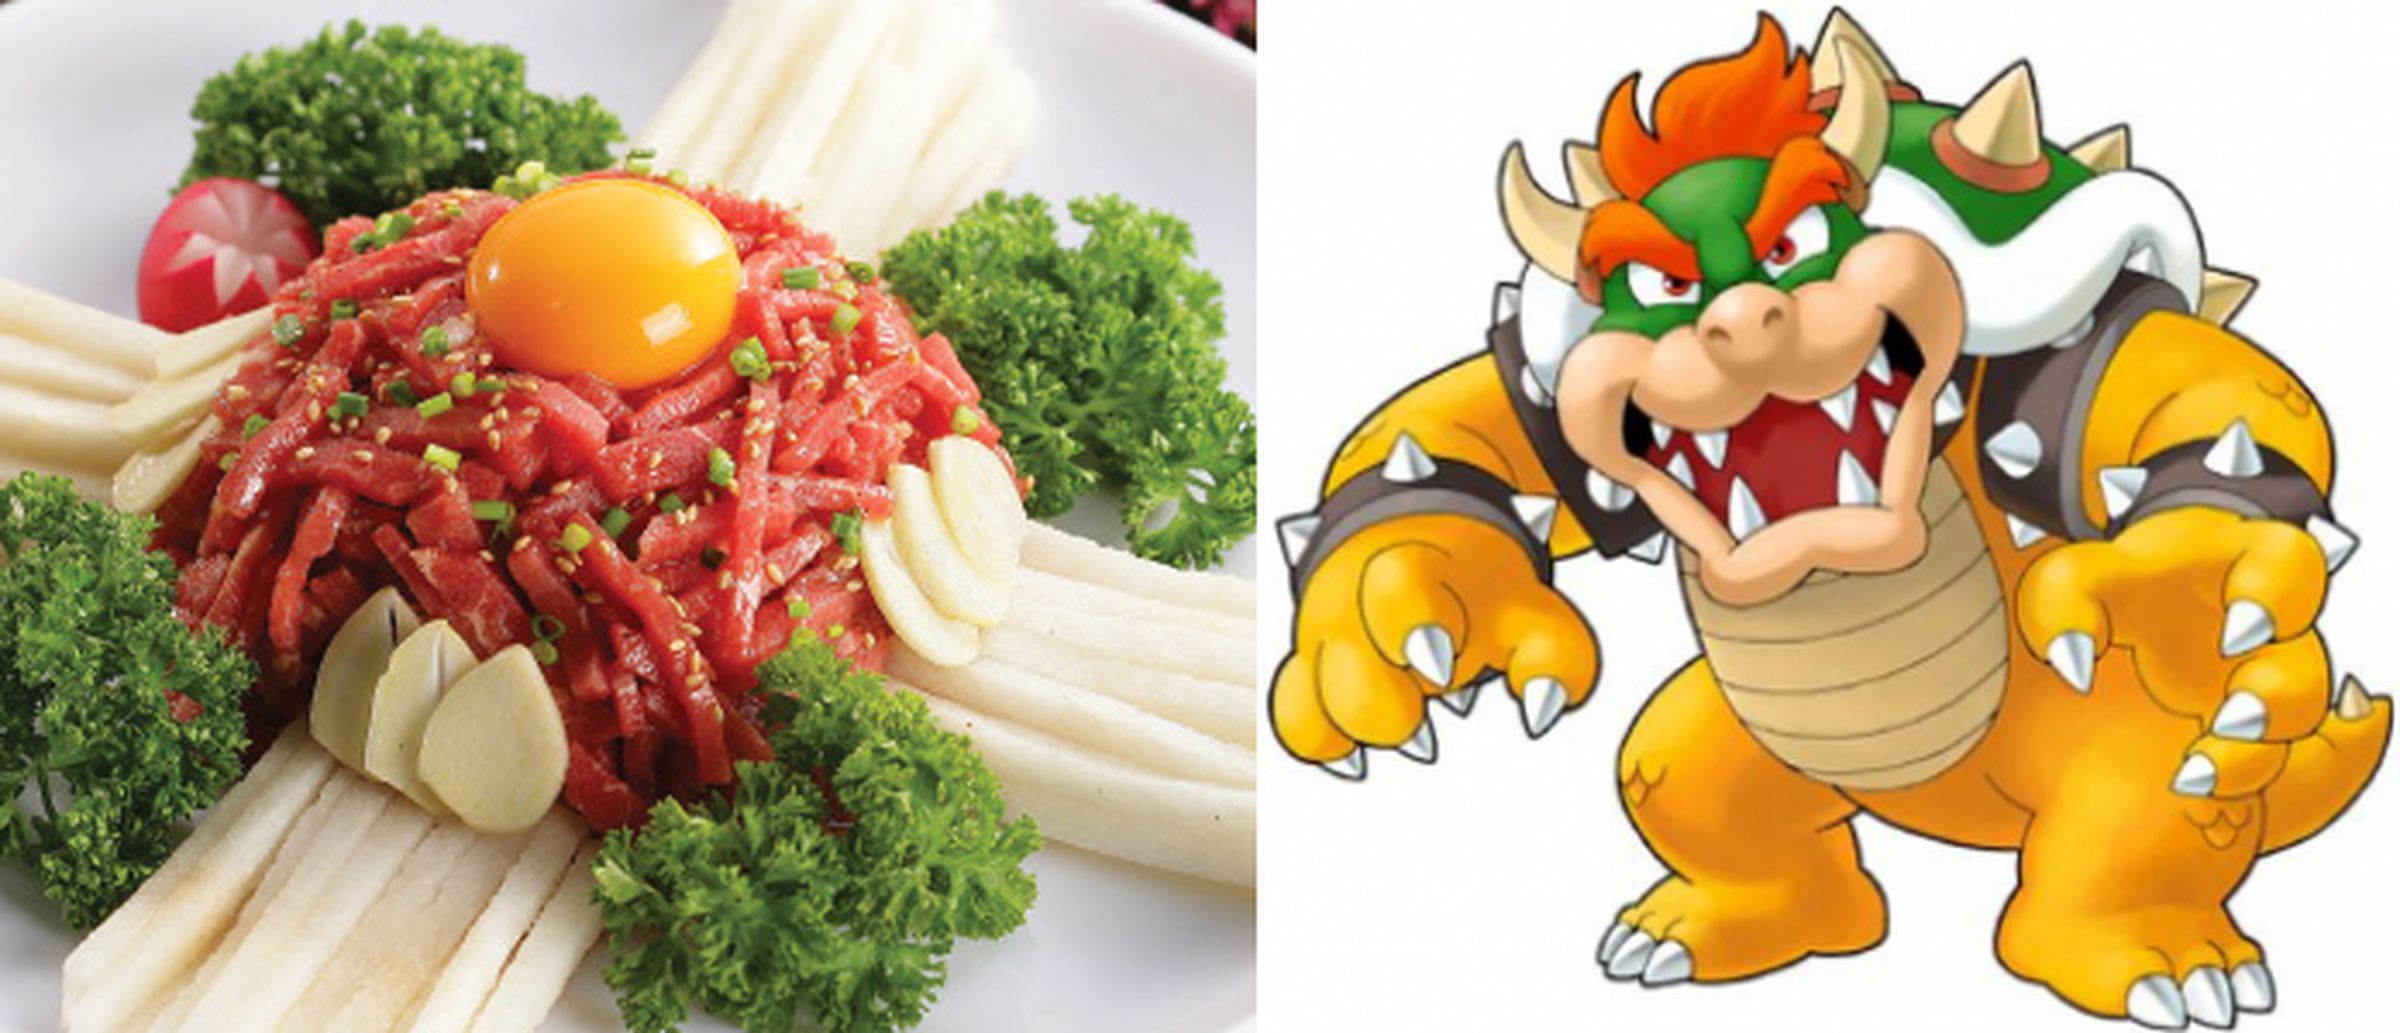 Yukhoe (left) and Bowser (right). Identical.